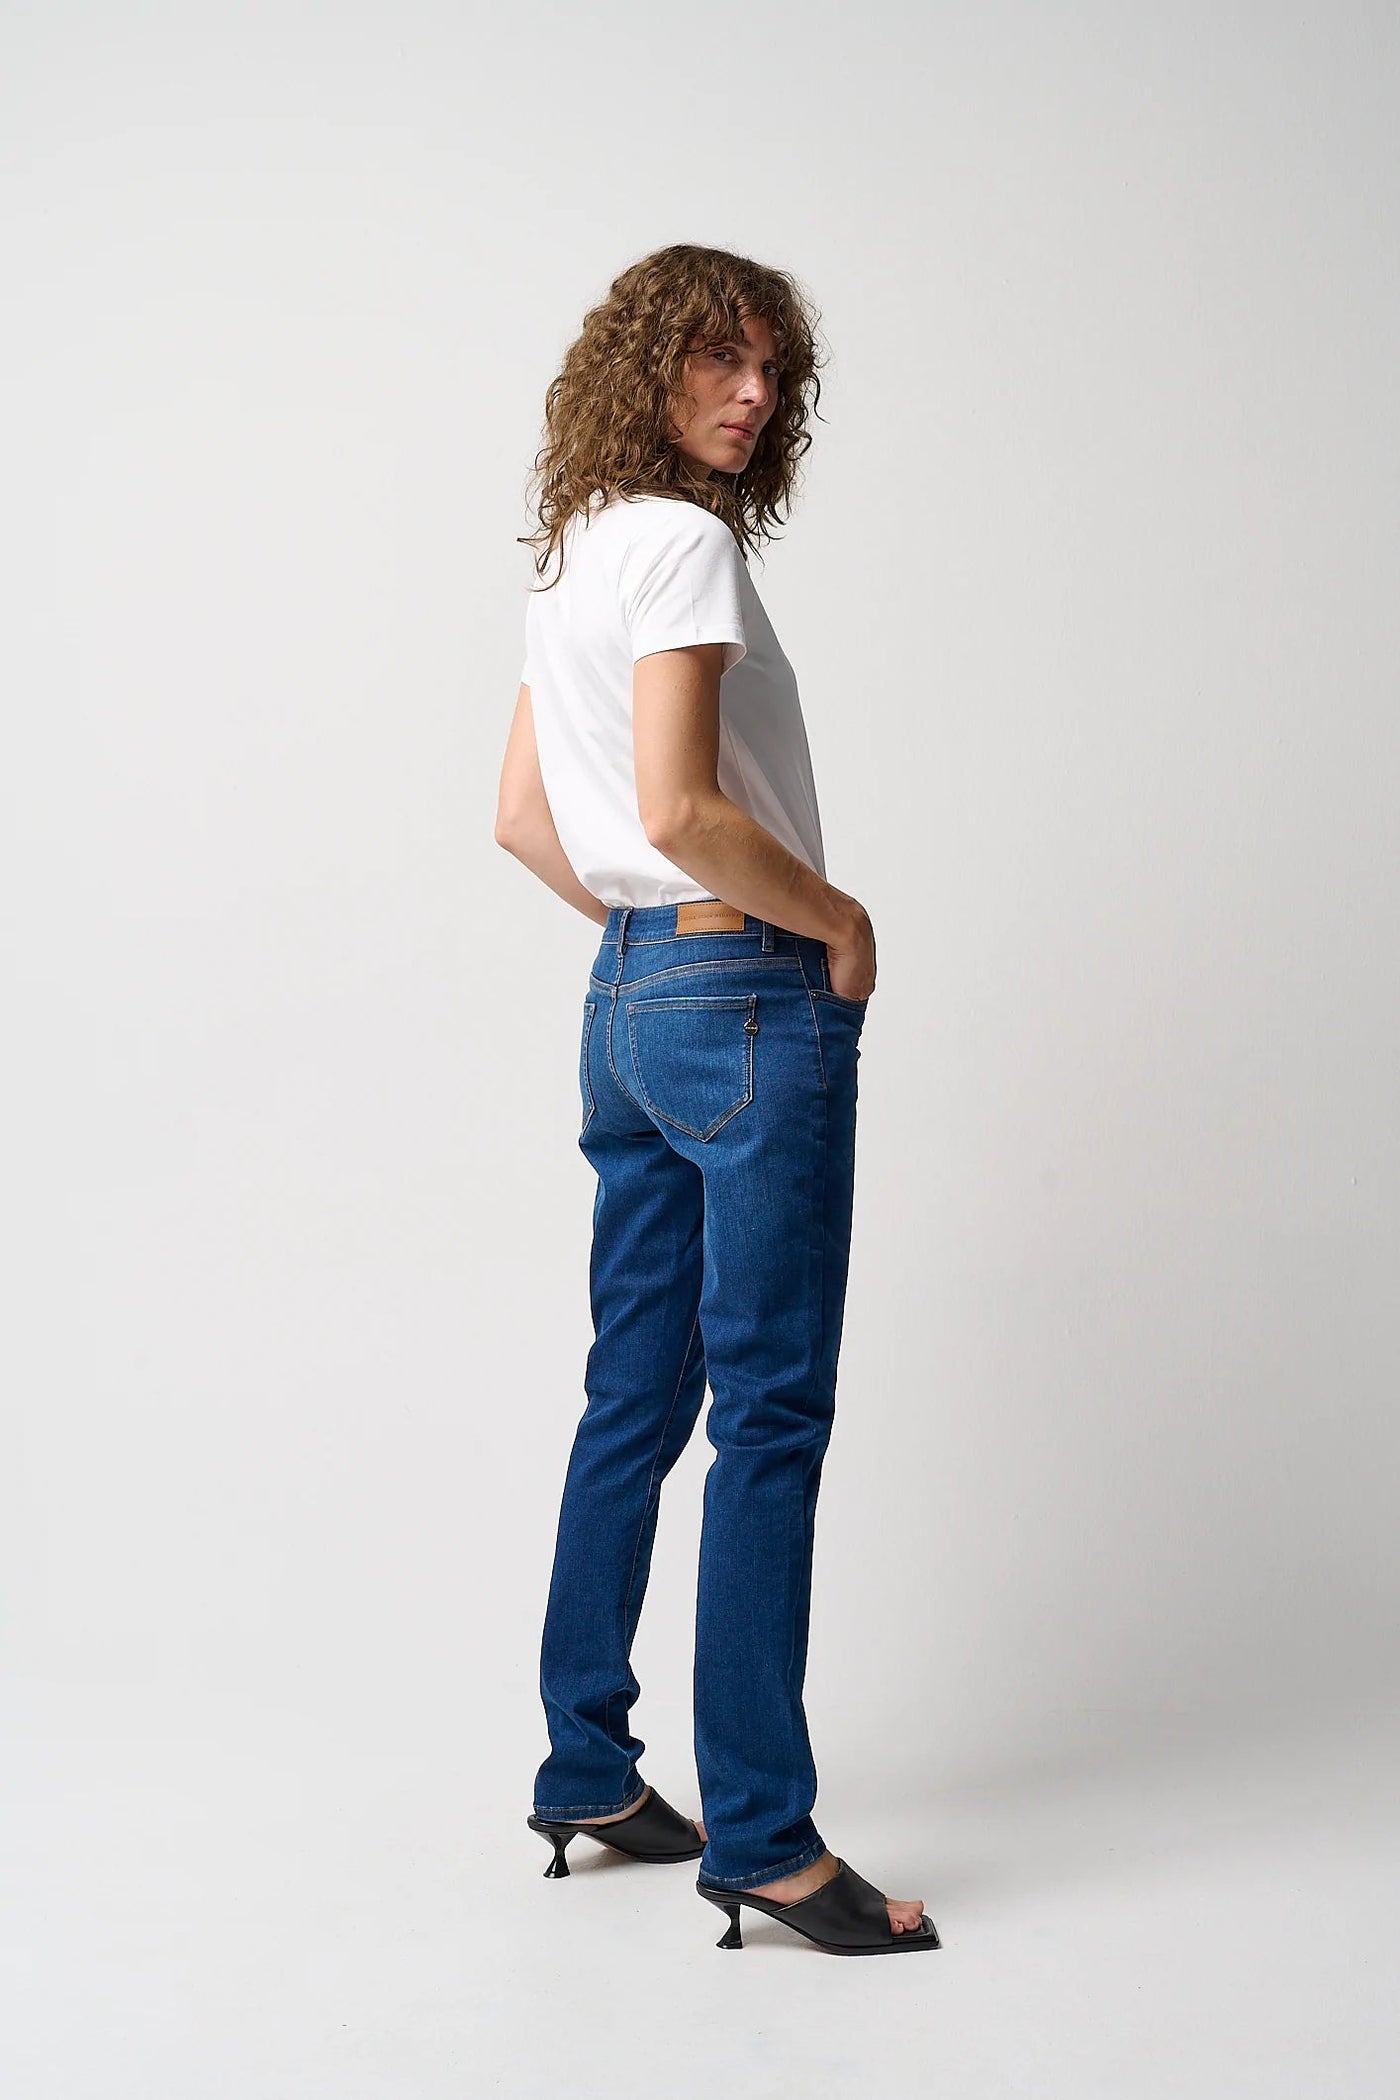 Pieszak PD Helene Jeans SWAN Wash Exclusive Osaka-Womens-Ohh! By Gum - Shop Sustainable